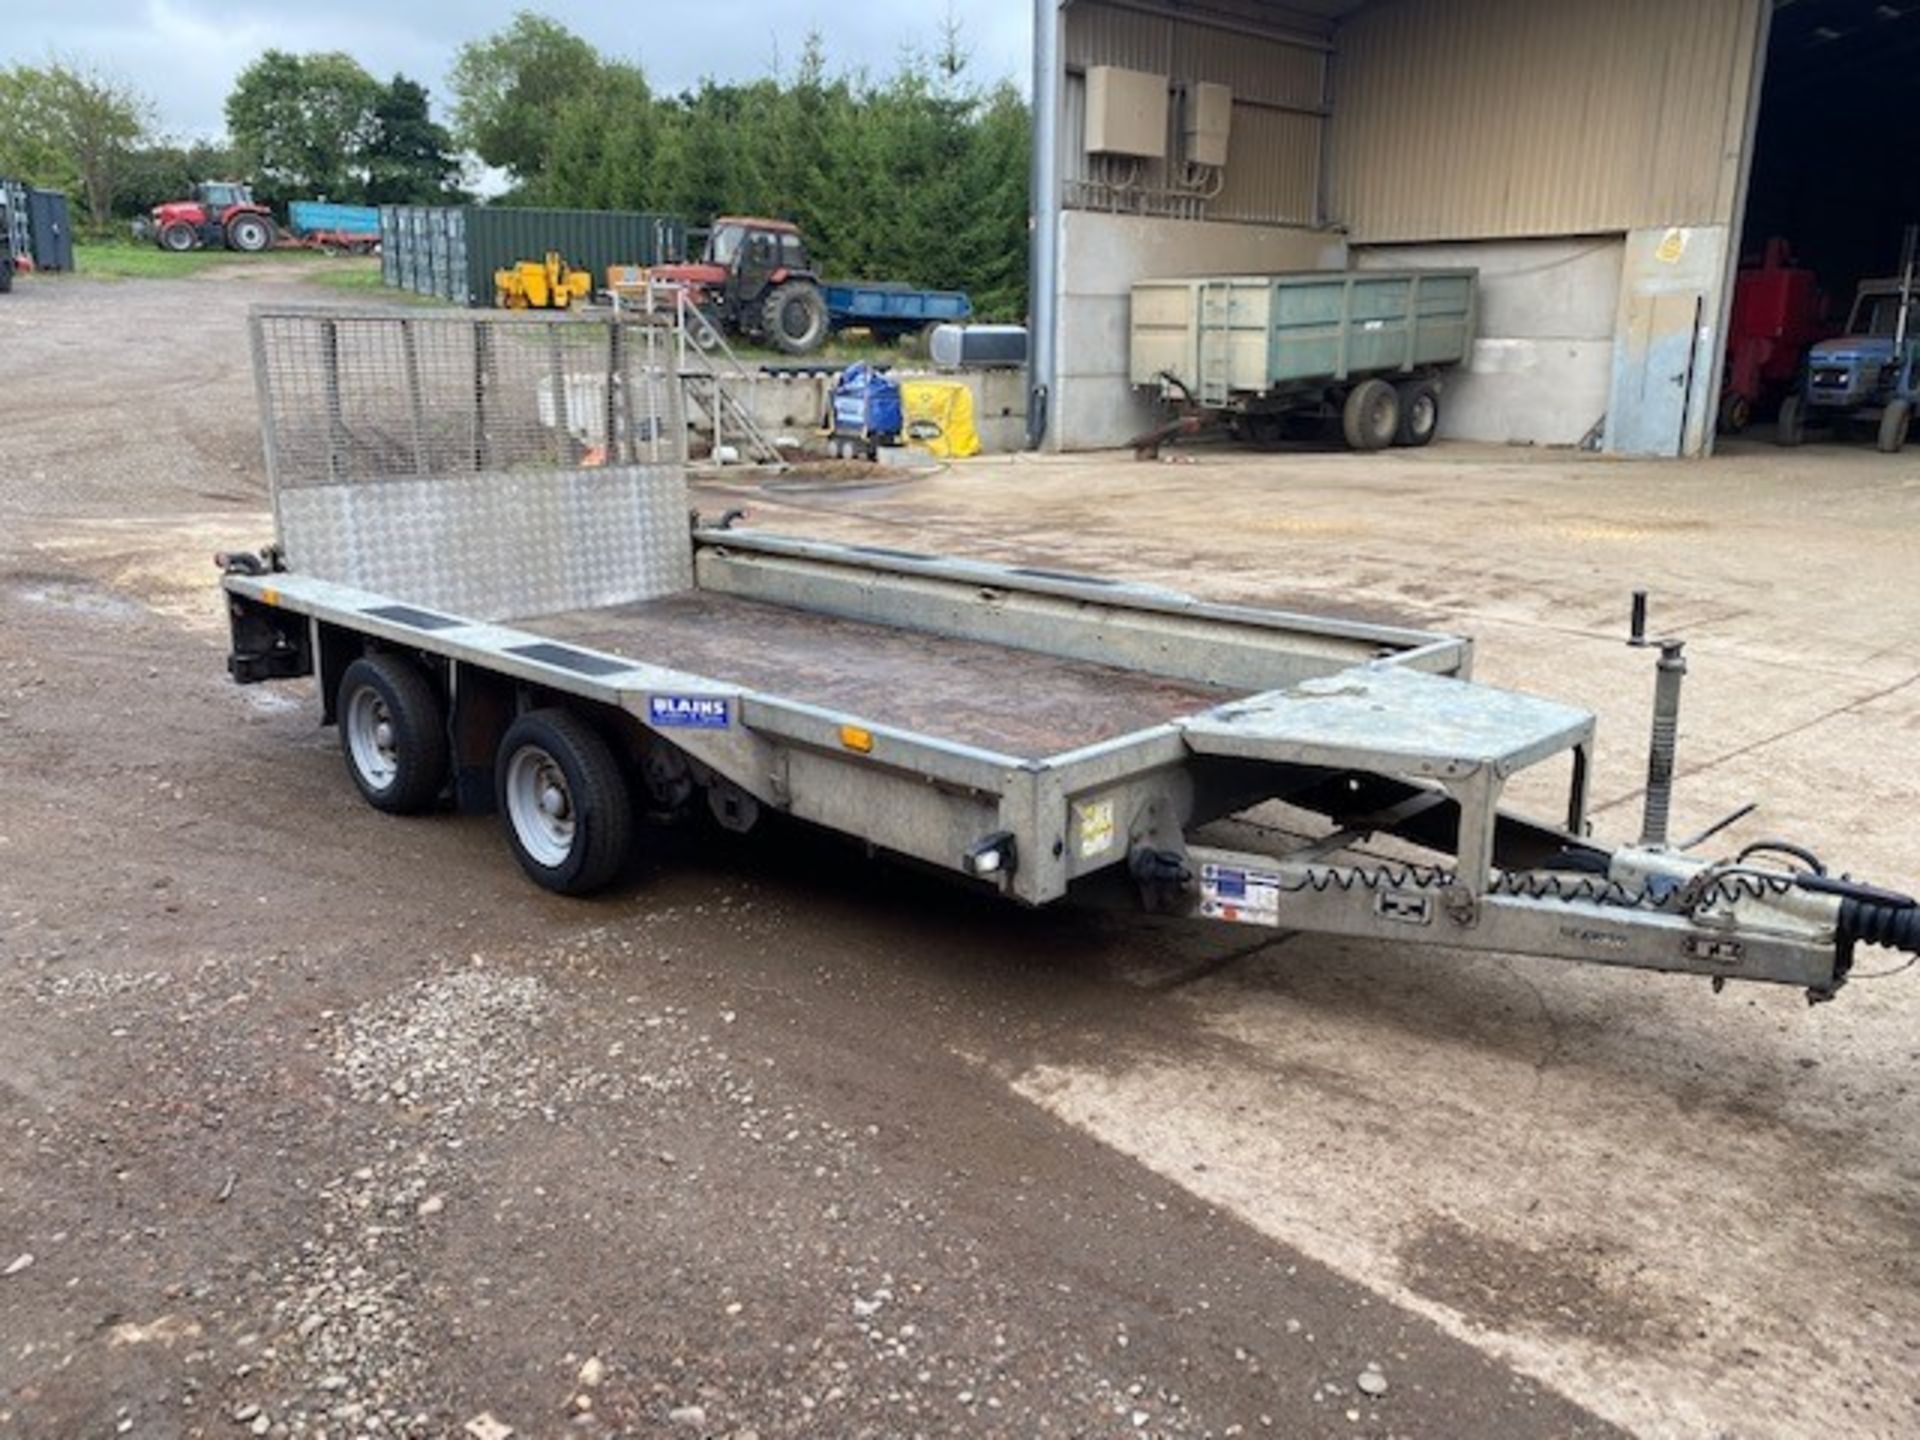 Ifor Williams 12 x 6 Plant Trailer, One Owner From New, Ball Hitch, Good Trailer All Round*PLUS VAT* - Image 7 of 10